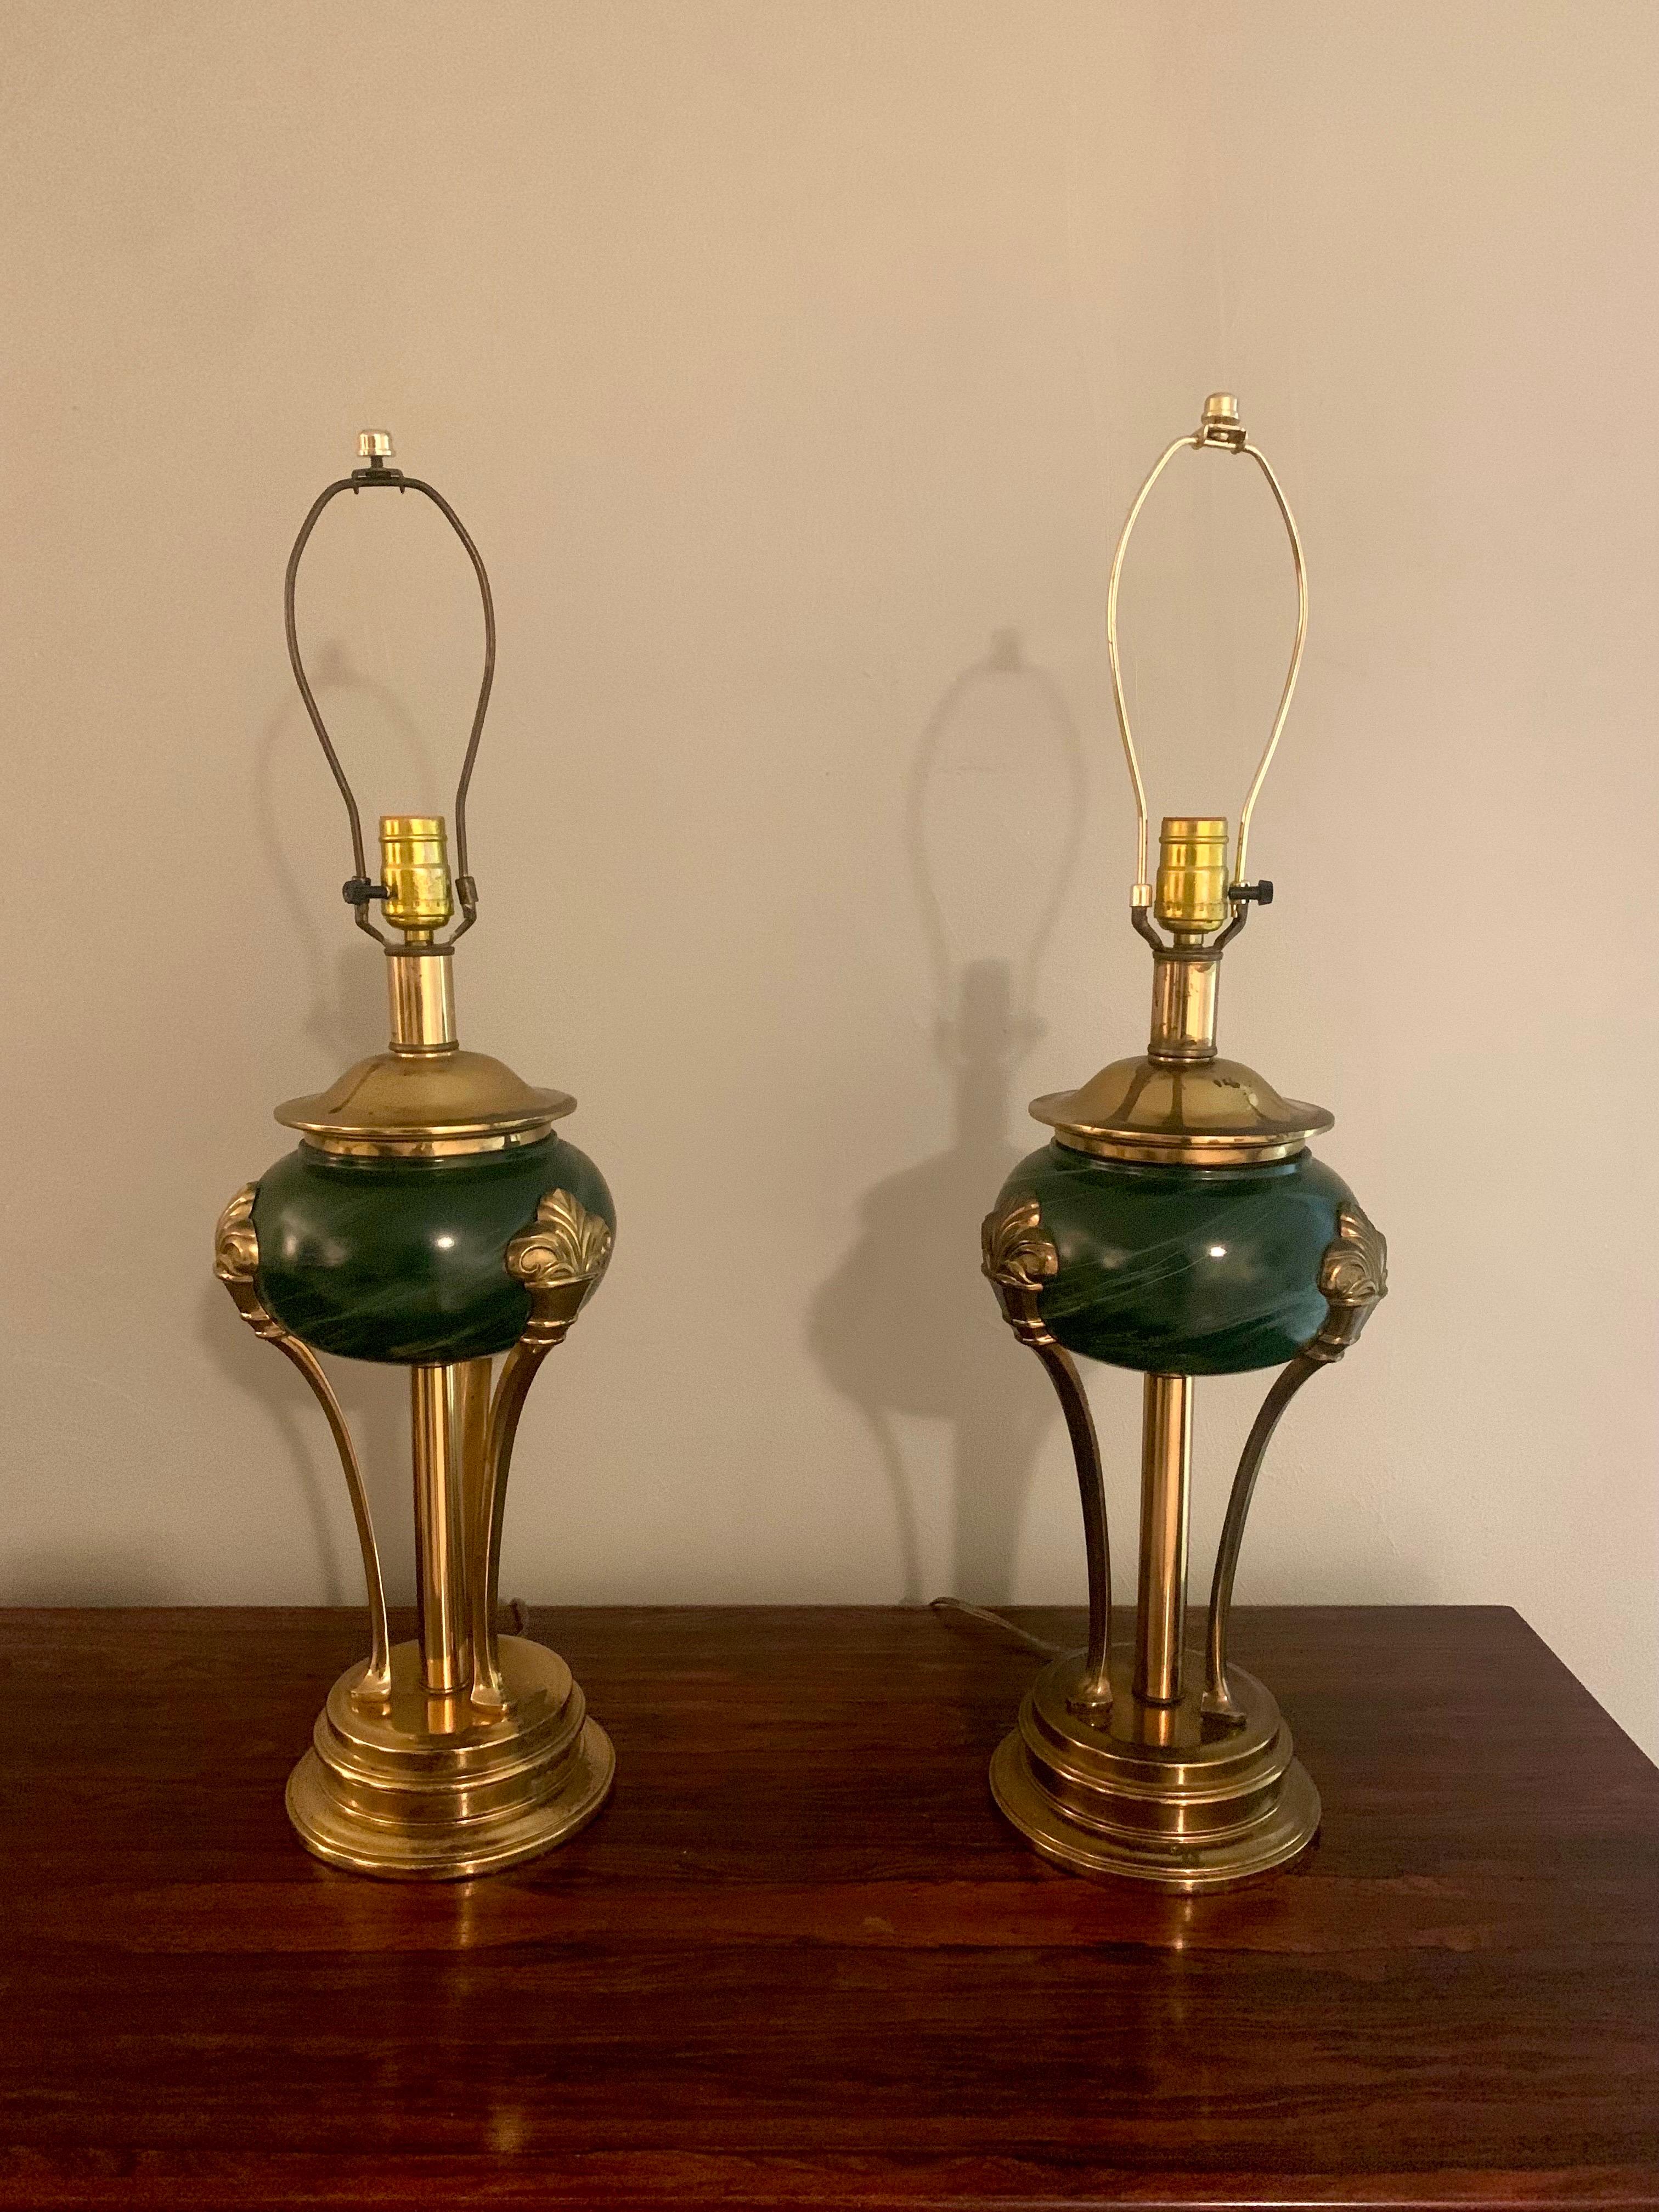 Gorgeous pair of neoclassical empire style lamps. Beautiful brass stands with 3 supports starting with a brass foot and ending with a Fleur D Lys adorning the green stone base. 

Unsure of origin, but definitely French inspired. 

Height: 29”